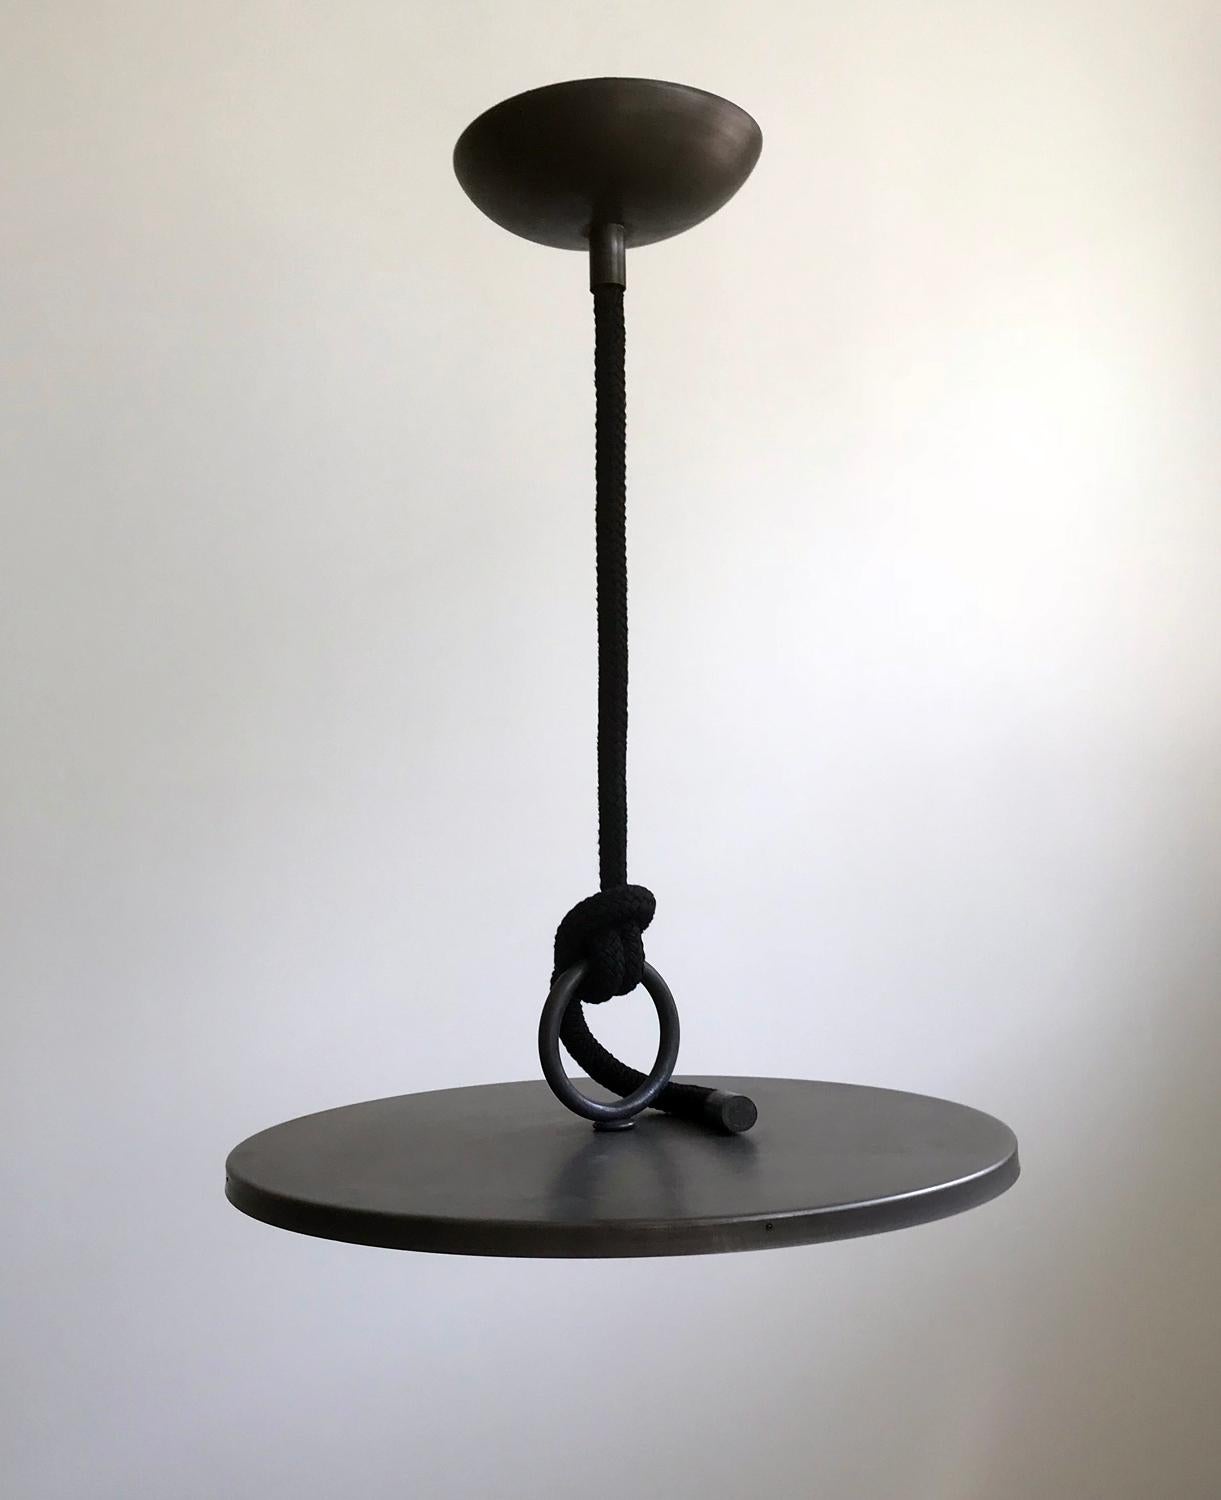 A large contemporary LED pendant light by Craig Jenkins. Hand spun brass housing and ring made in Italy.
Less than an inch at the outer edge and 23 inches in diameter. 7 inches in total height.
Suspended from a large ceiling canopy by a thick,